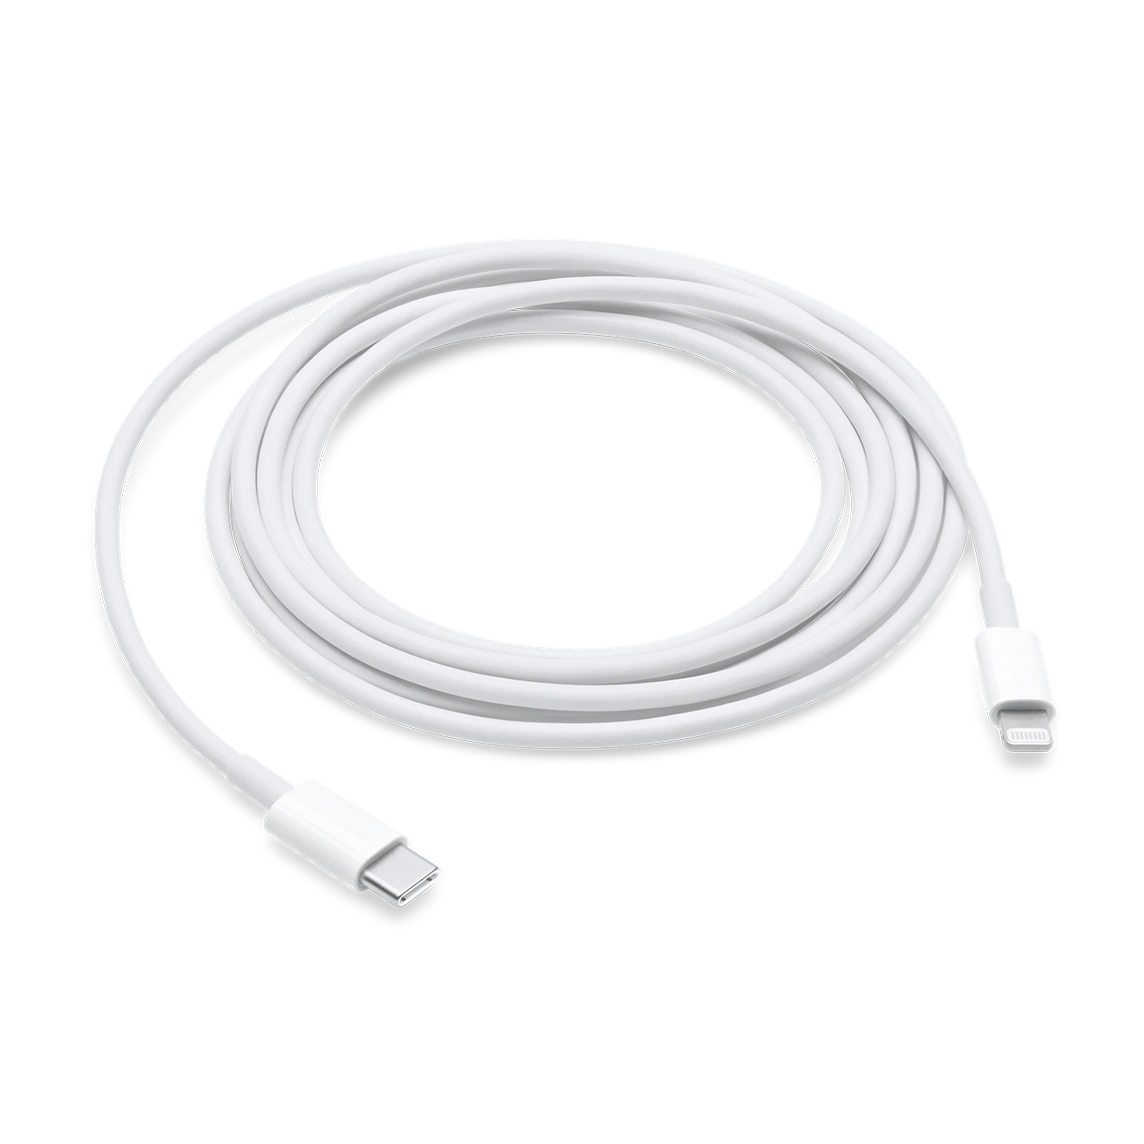 apple-usb-c-to-lightning-cable-2m